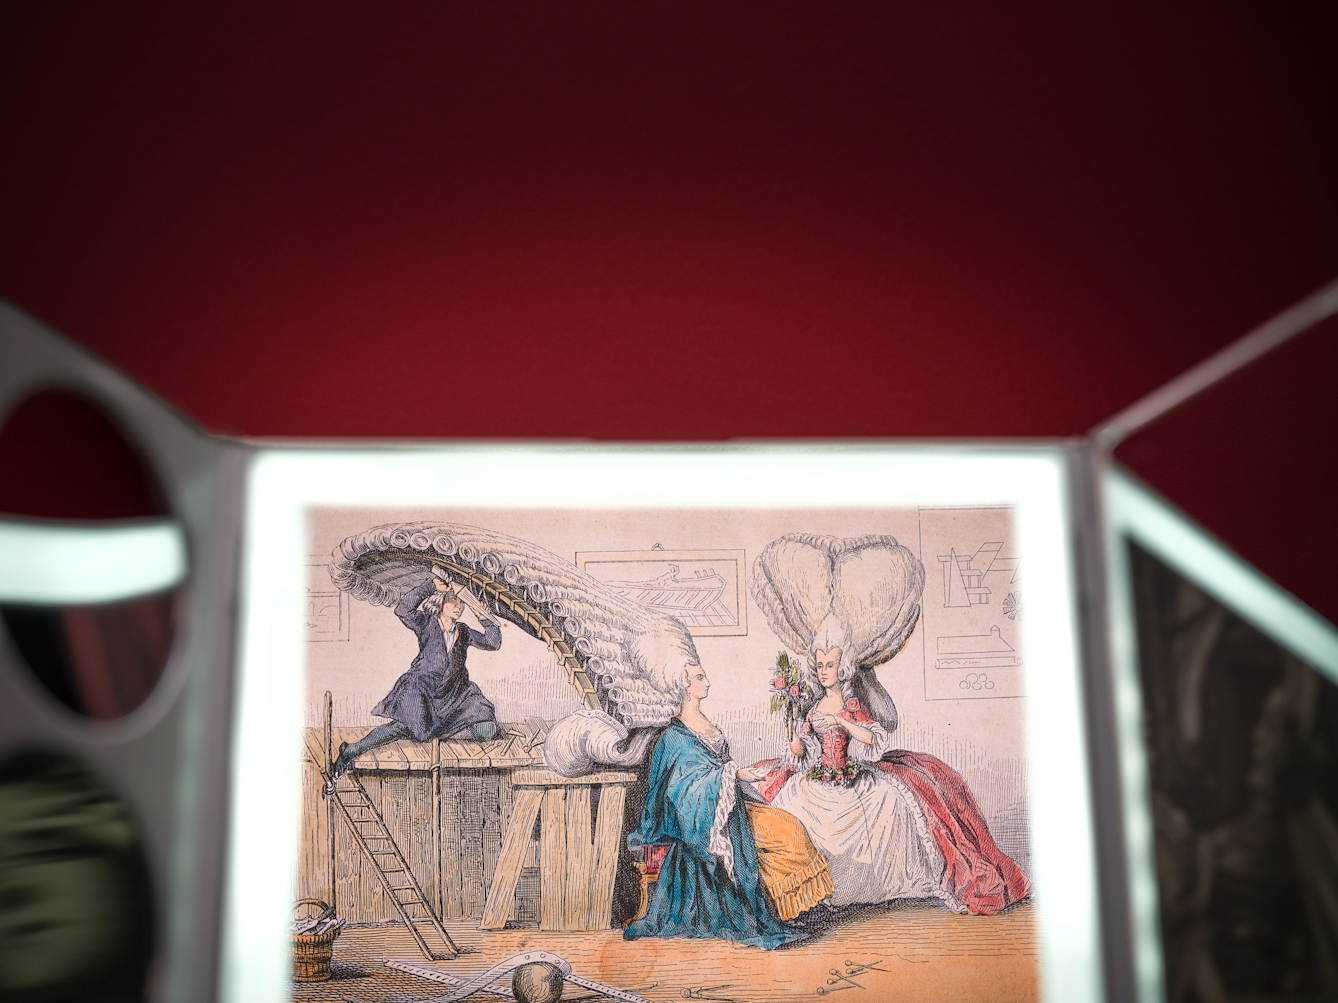 Photograph of the top half of a three-fold beauty mirror against a red background. reflected in the main mirror is a 19th century illustration showing a man tying a woman's absurdly high wig on to a scaffolding; another woman wearing a tall heart-shaped wig looks on.